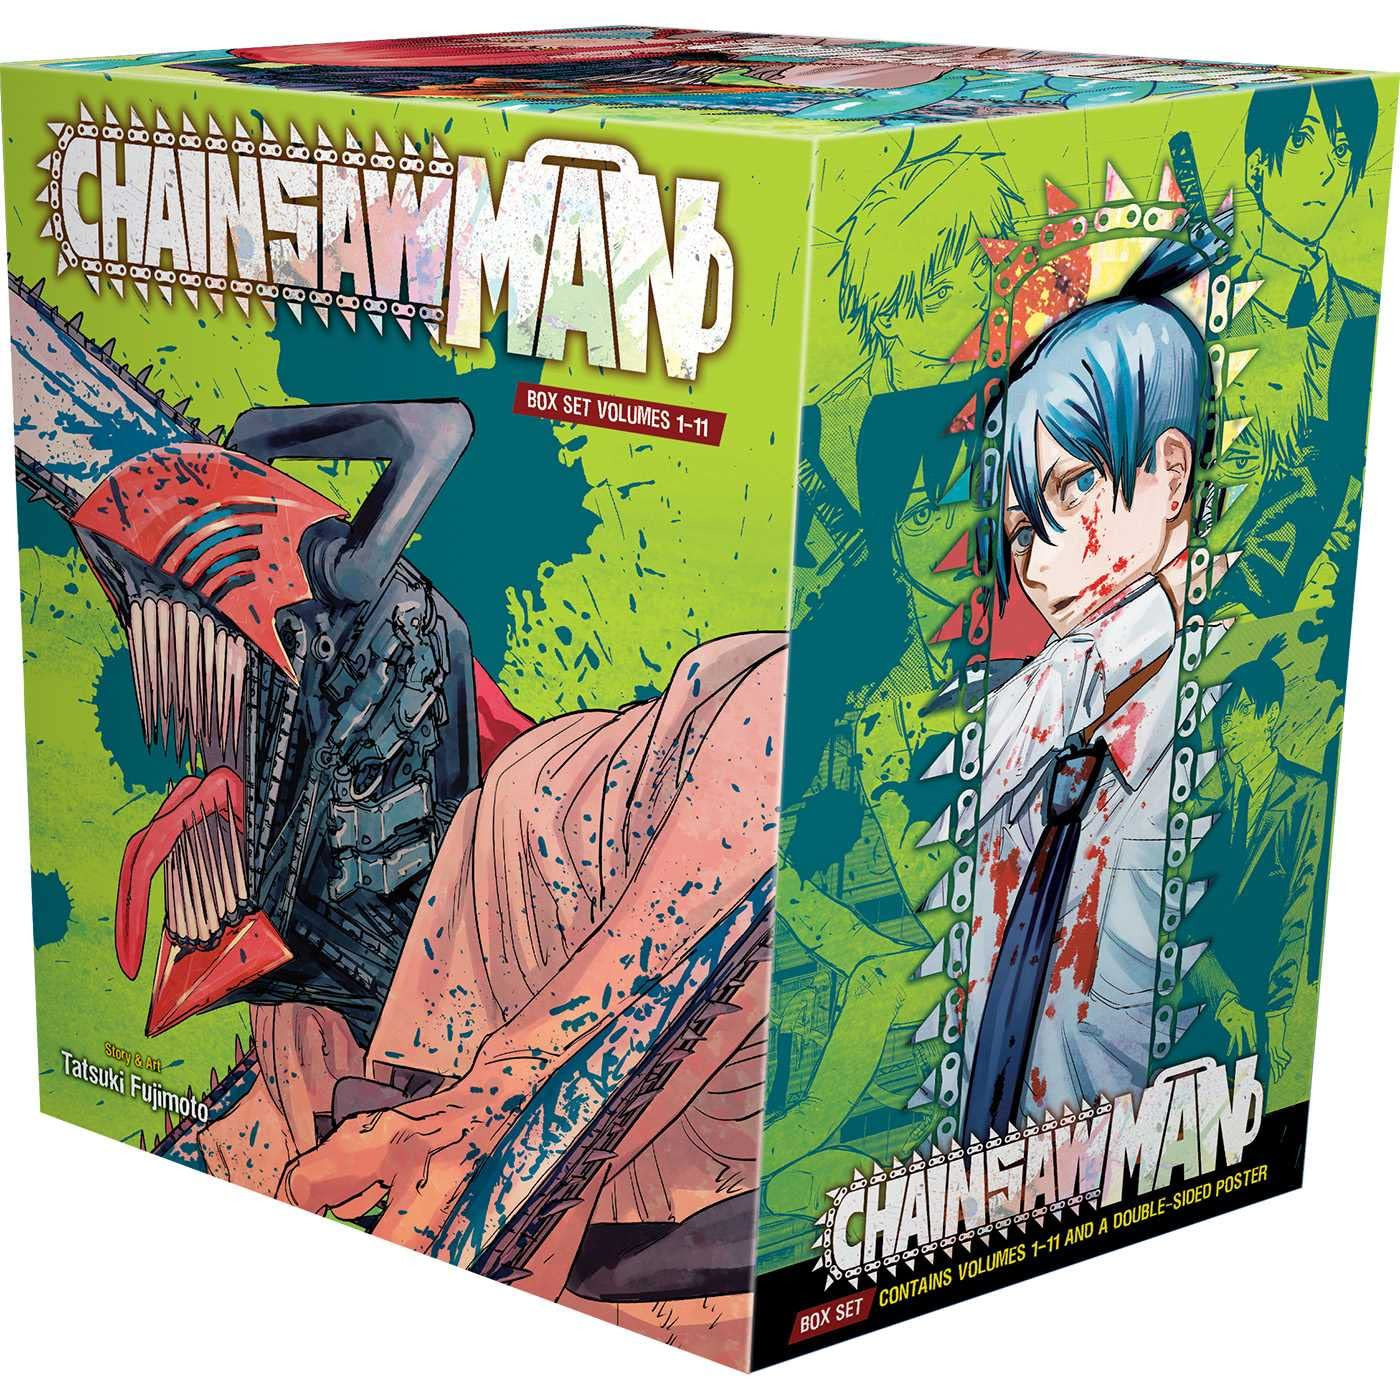 Chainsaw Man Box Set: Includes Volumes 1-11 - Paperback (NEW)